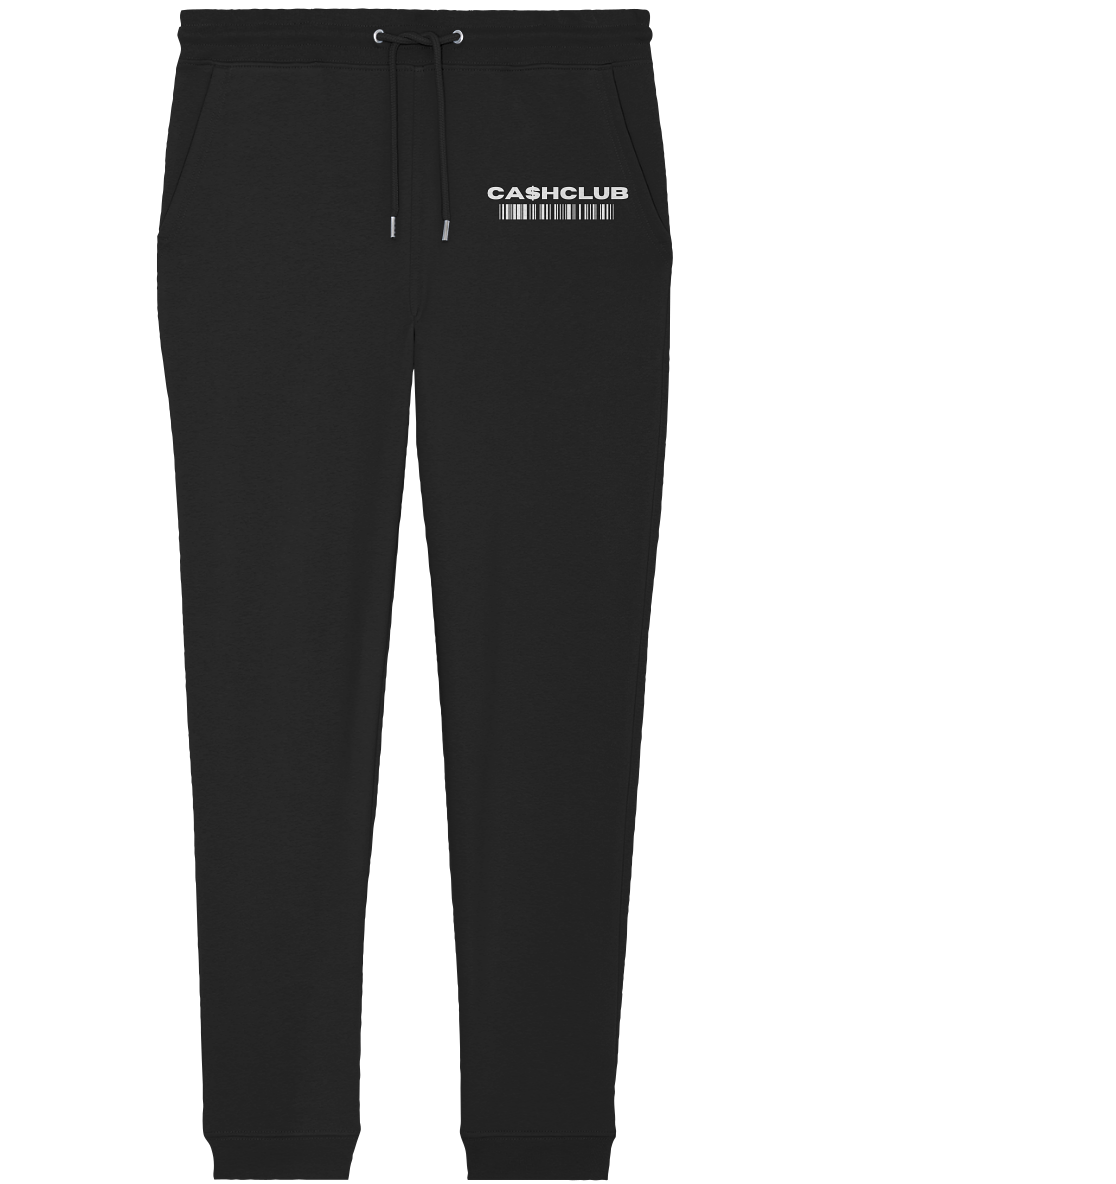 CA$H CLUB COLLECTION by LIMITLOS - Organic Jogger Pants